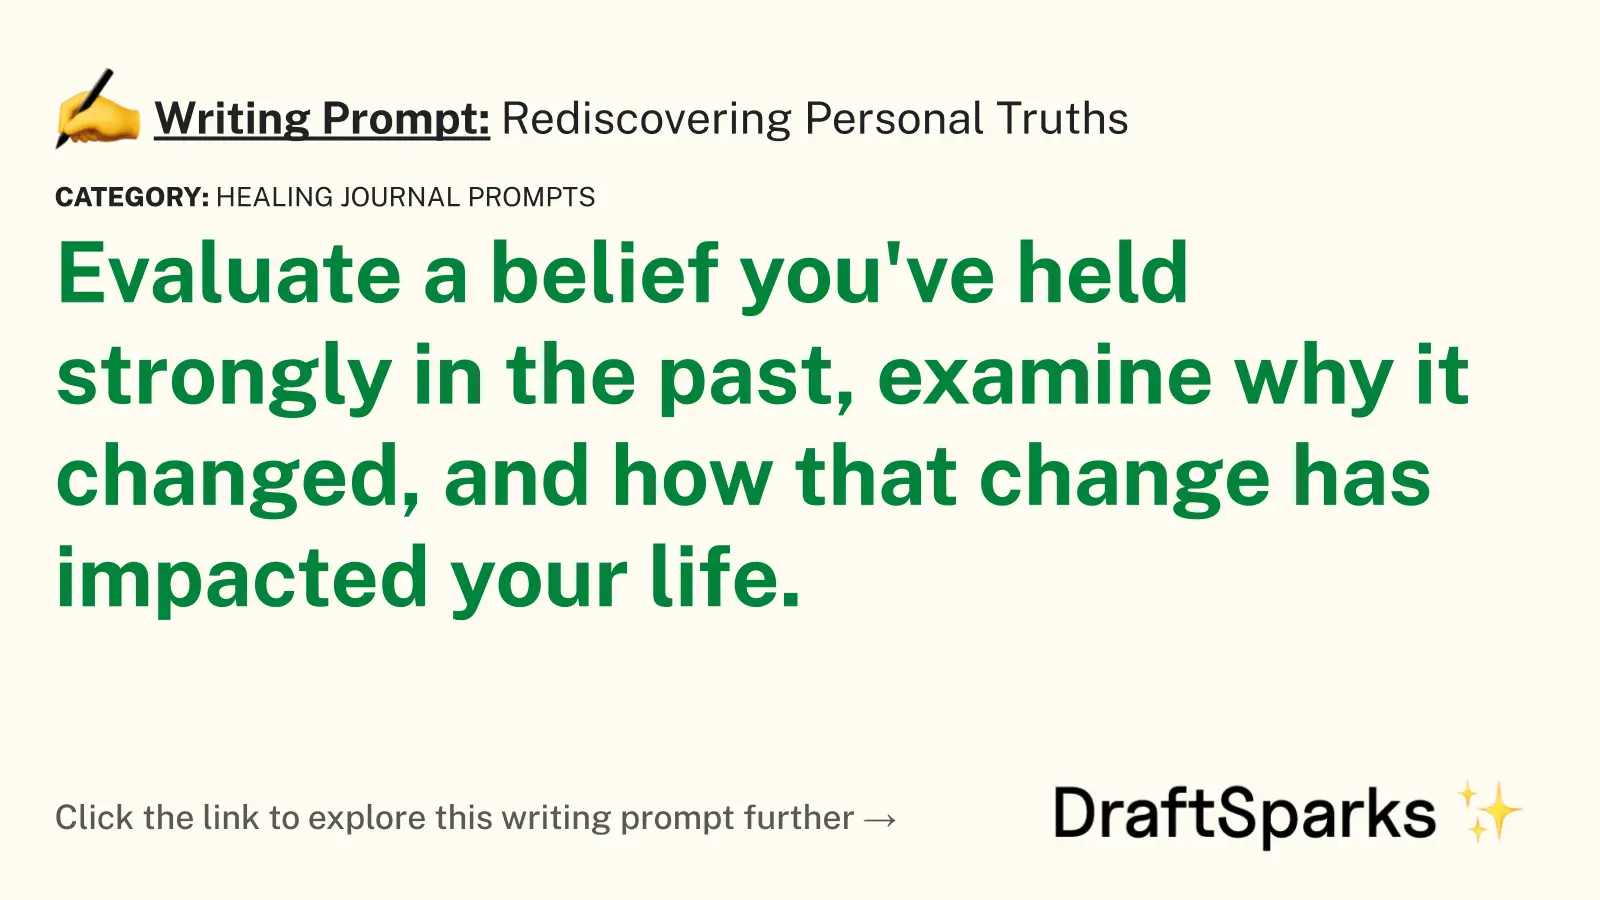 Rediscovering Personal Truths